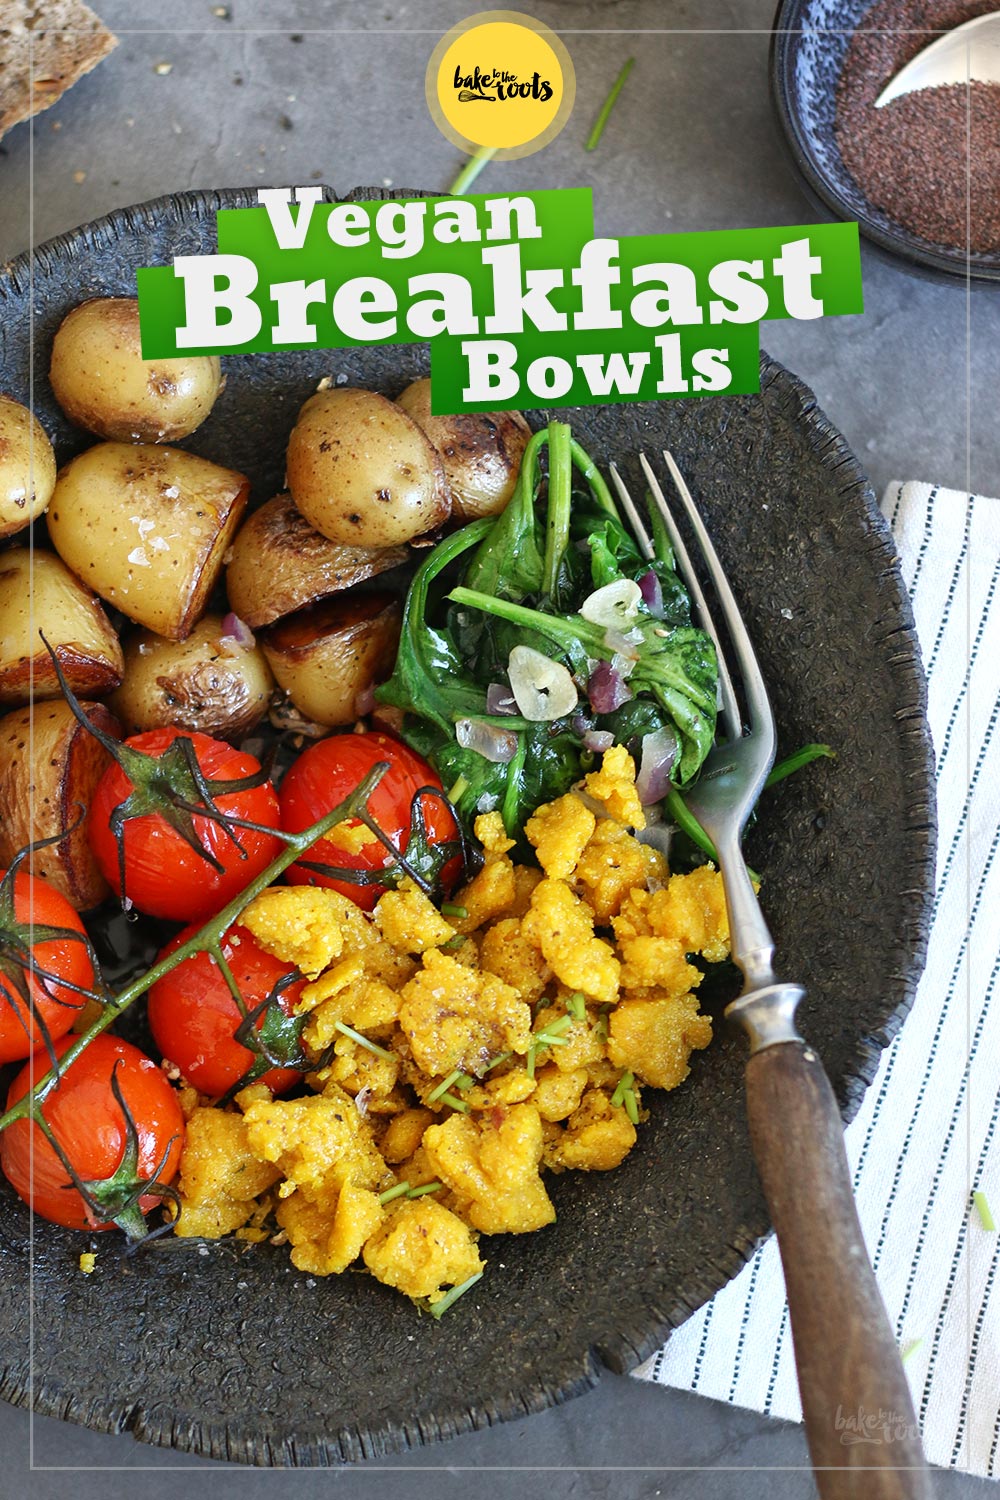 Vegan Savory Breakfast Bowl with Vegan Scrambled Eggs | Bake to the roots